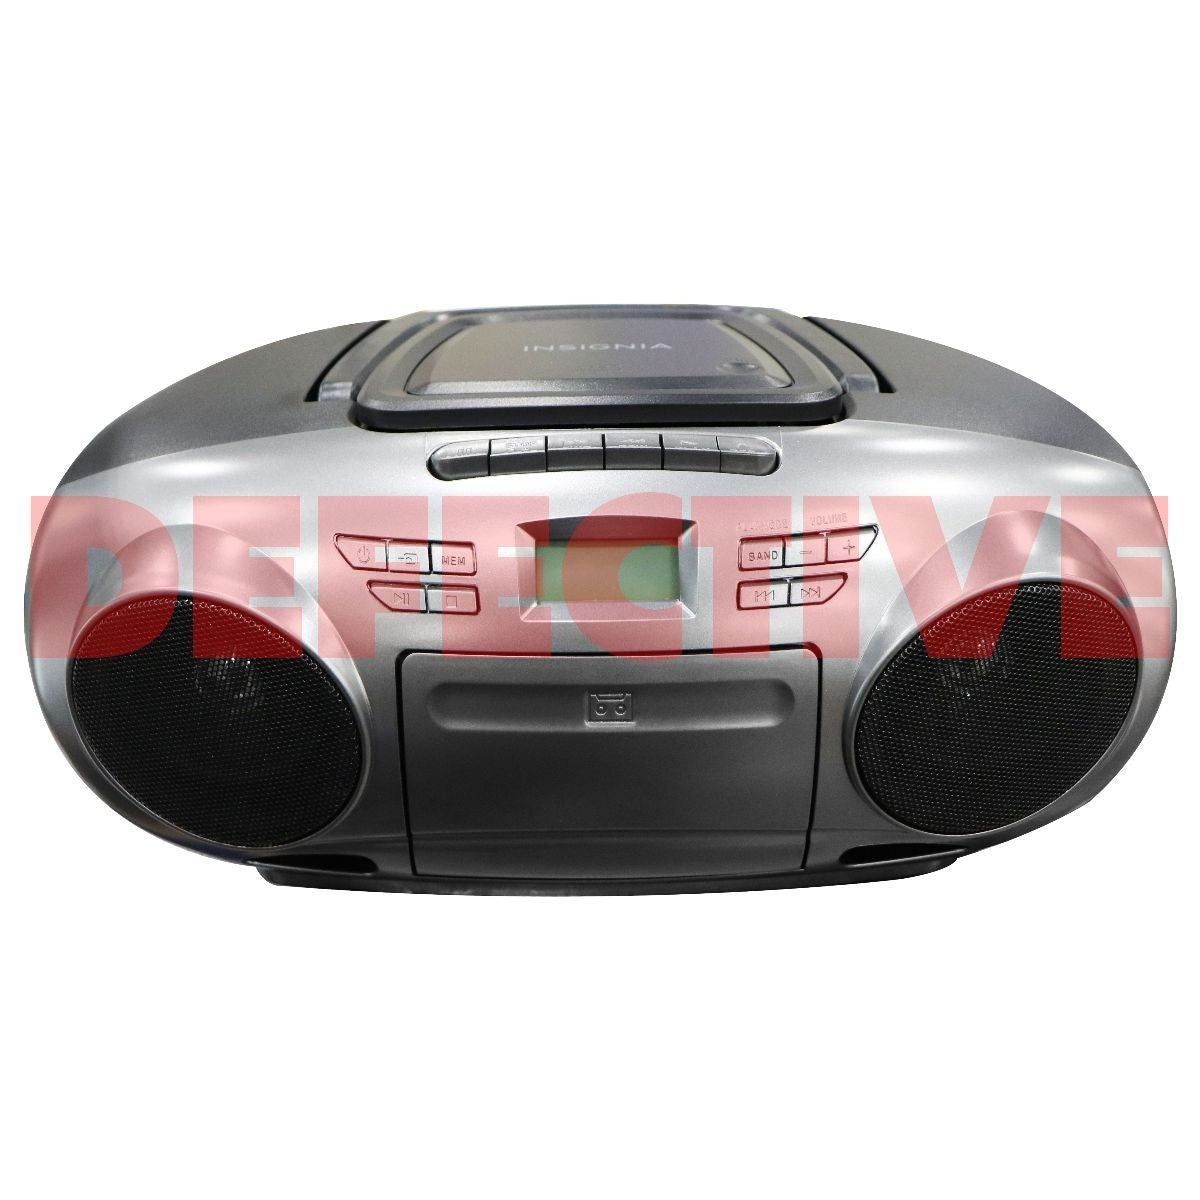  Insignia CD/cassette Boombox with Am/fm Radio : Electronics